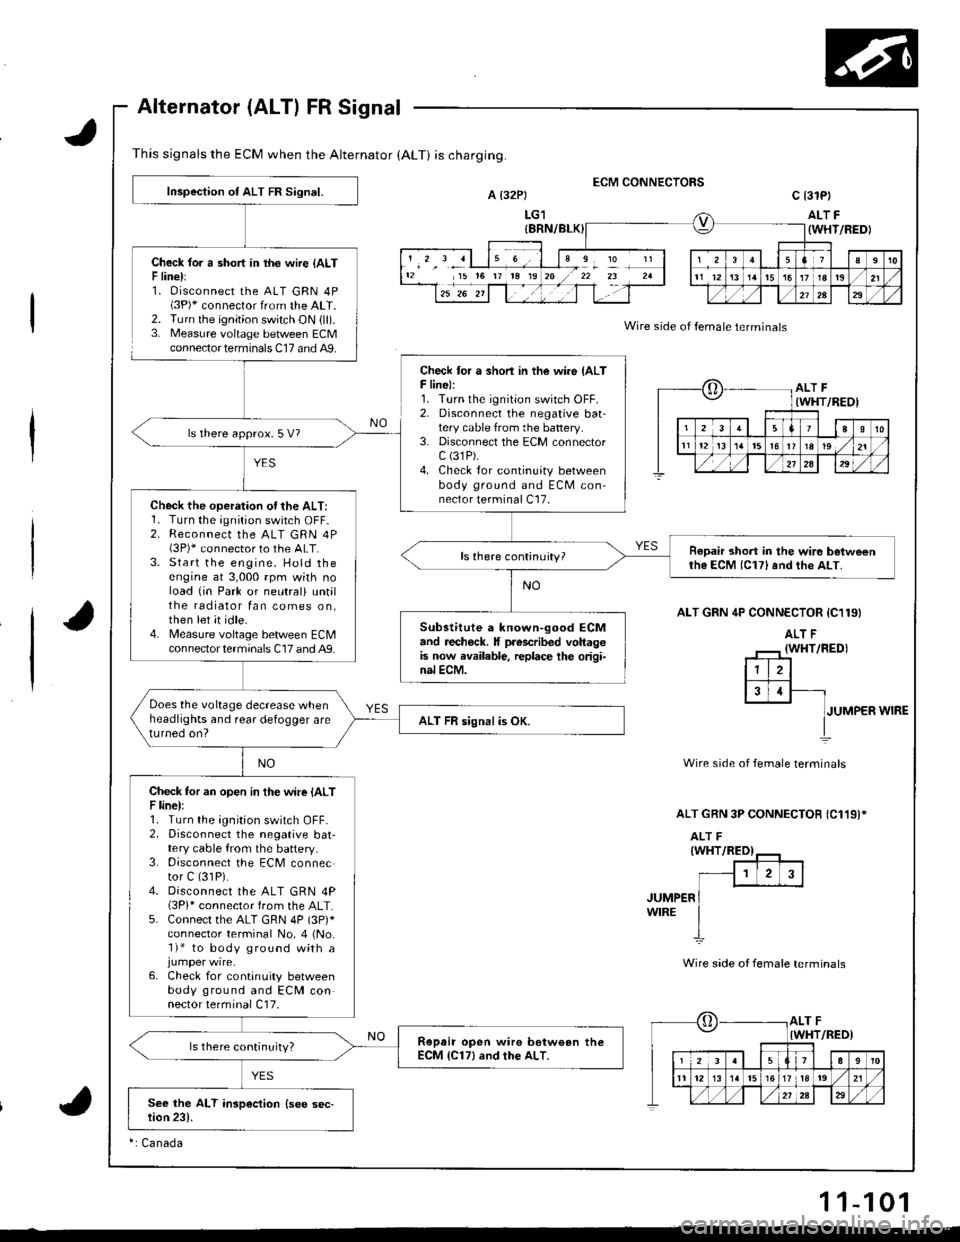 HONDA INTEGRA 1998 4.G Workshop Manual This signals the ECM when the Alternator (ALT) is charging.
Alternator (ALT) FR Signal
Check lor a short in th€ wire {ALTF line):1. Oisconnect the ALT GRN 4P(3P)* connector from the ALT.2. Turn the 